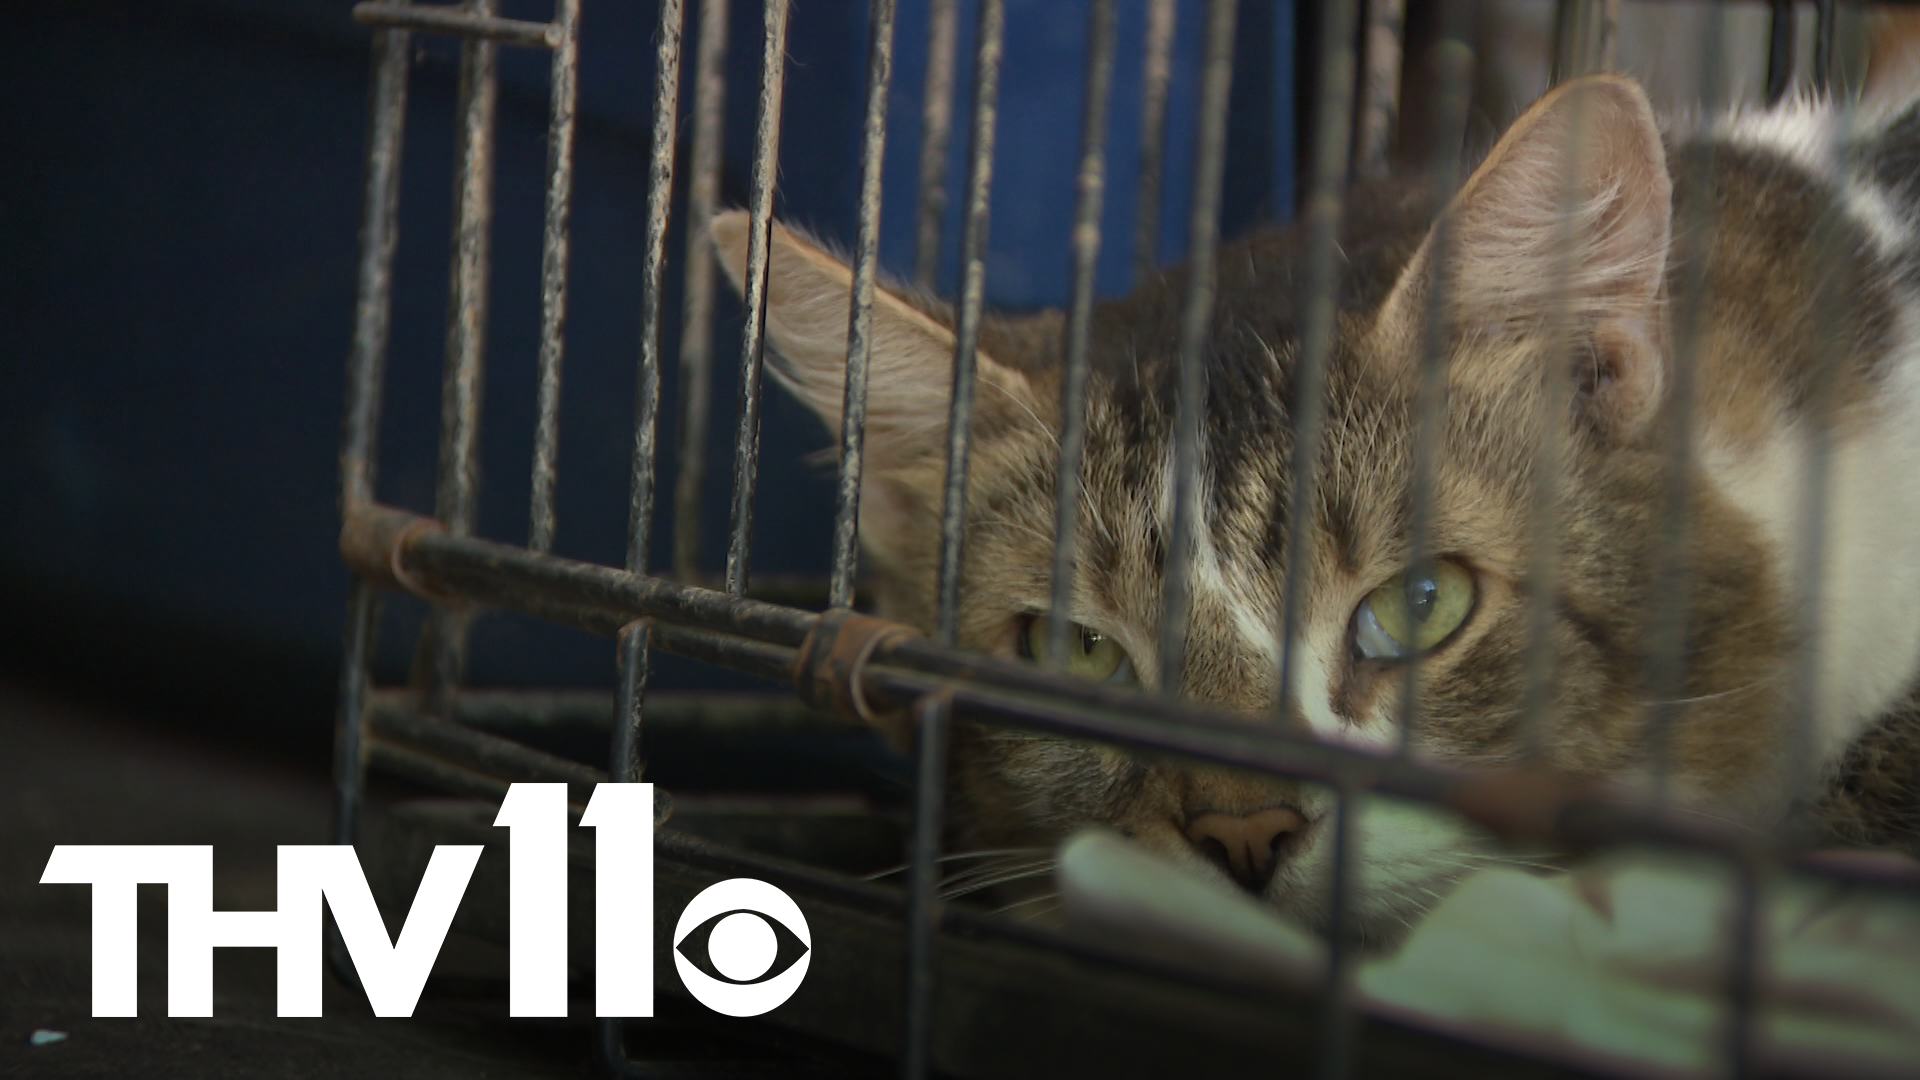 Around 100 cats and one dog were found inside the home. The cats are being taken to a shelter, but the humane society will need help with treatment costs.